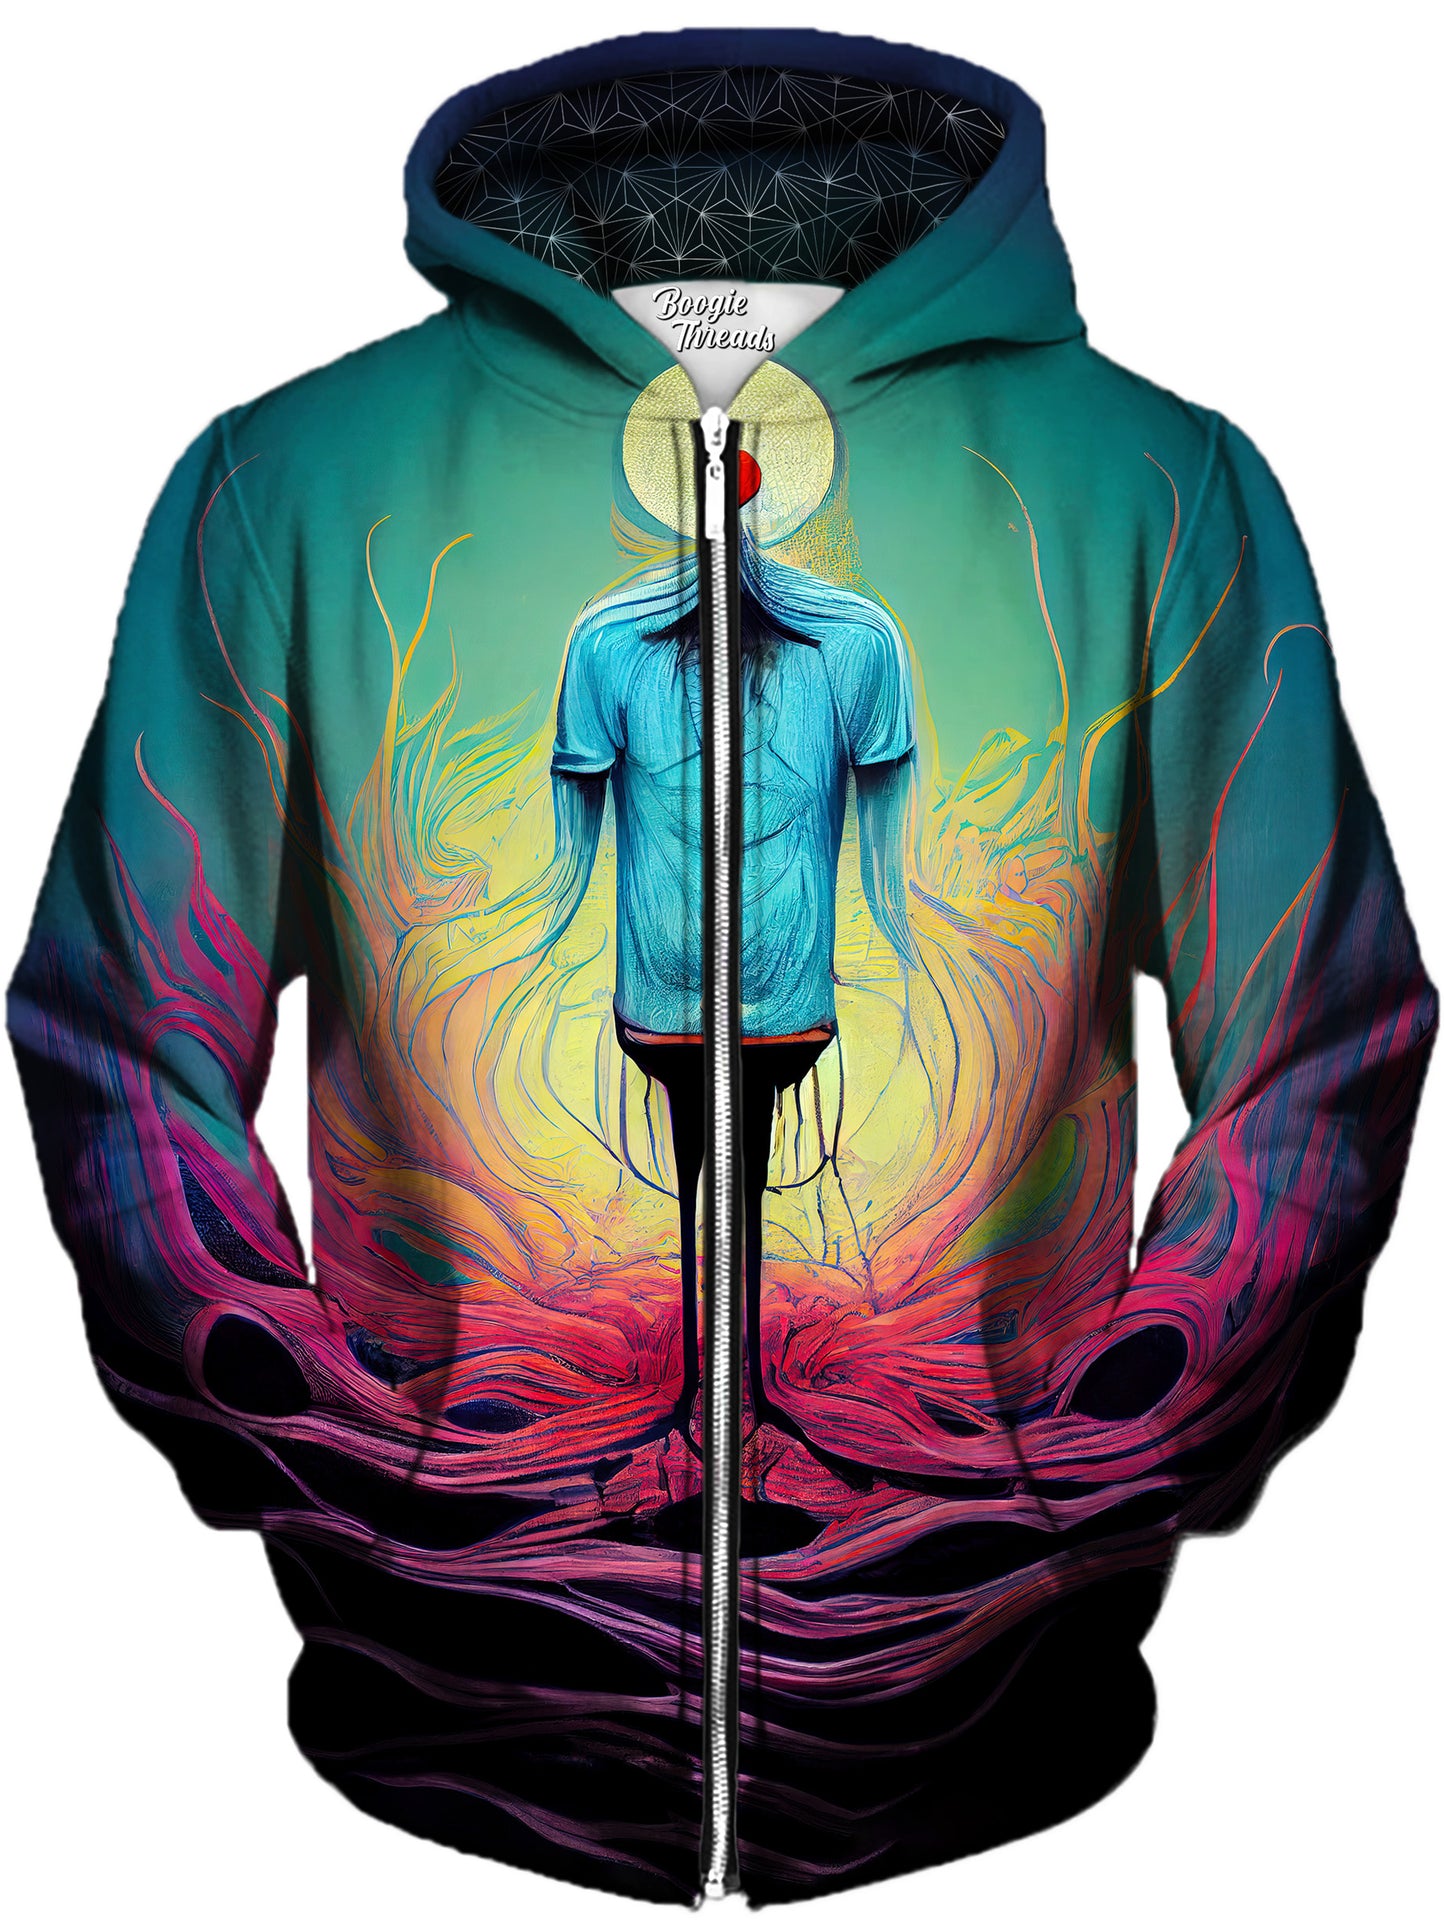 Approval Of Flame Unisex Zip-Up Hoodie, Gratefully Dyed, | iEDM